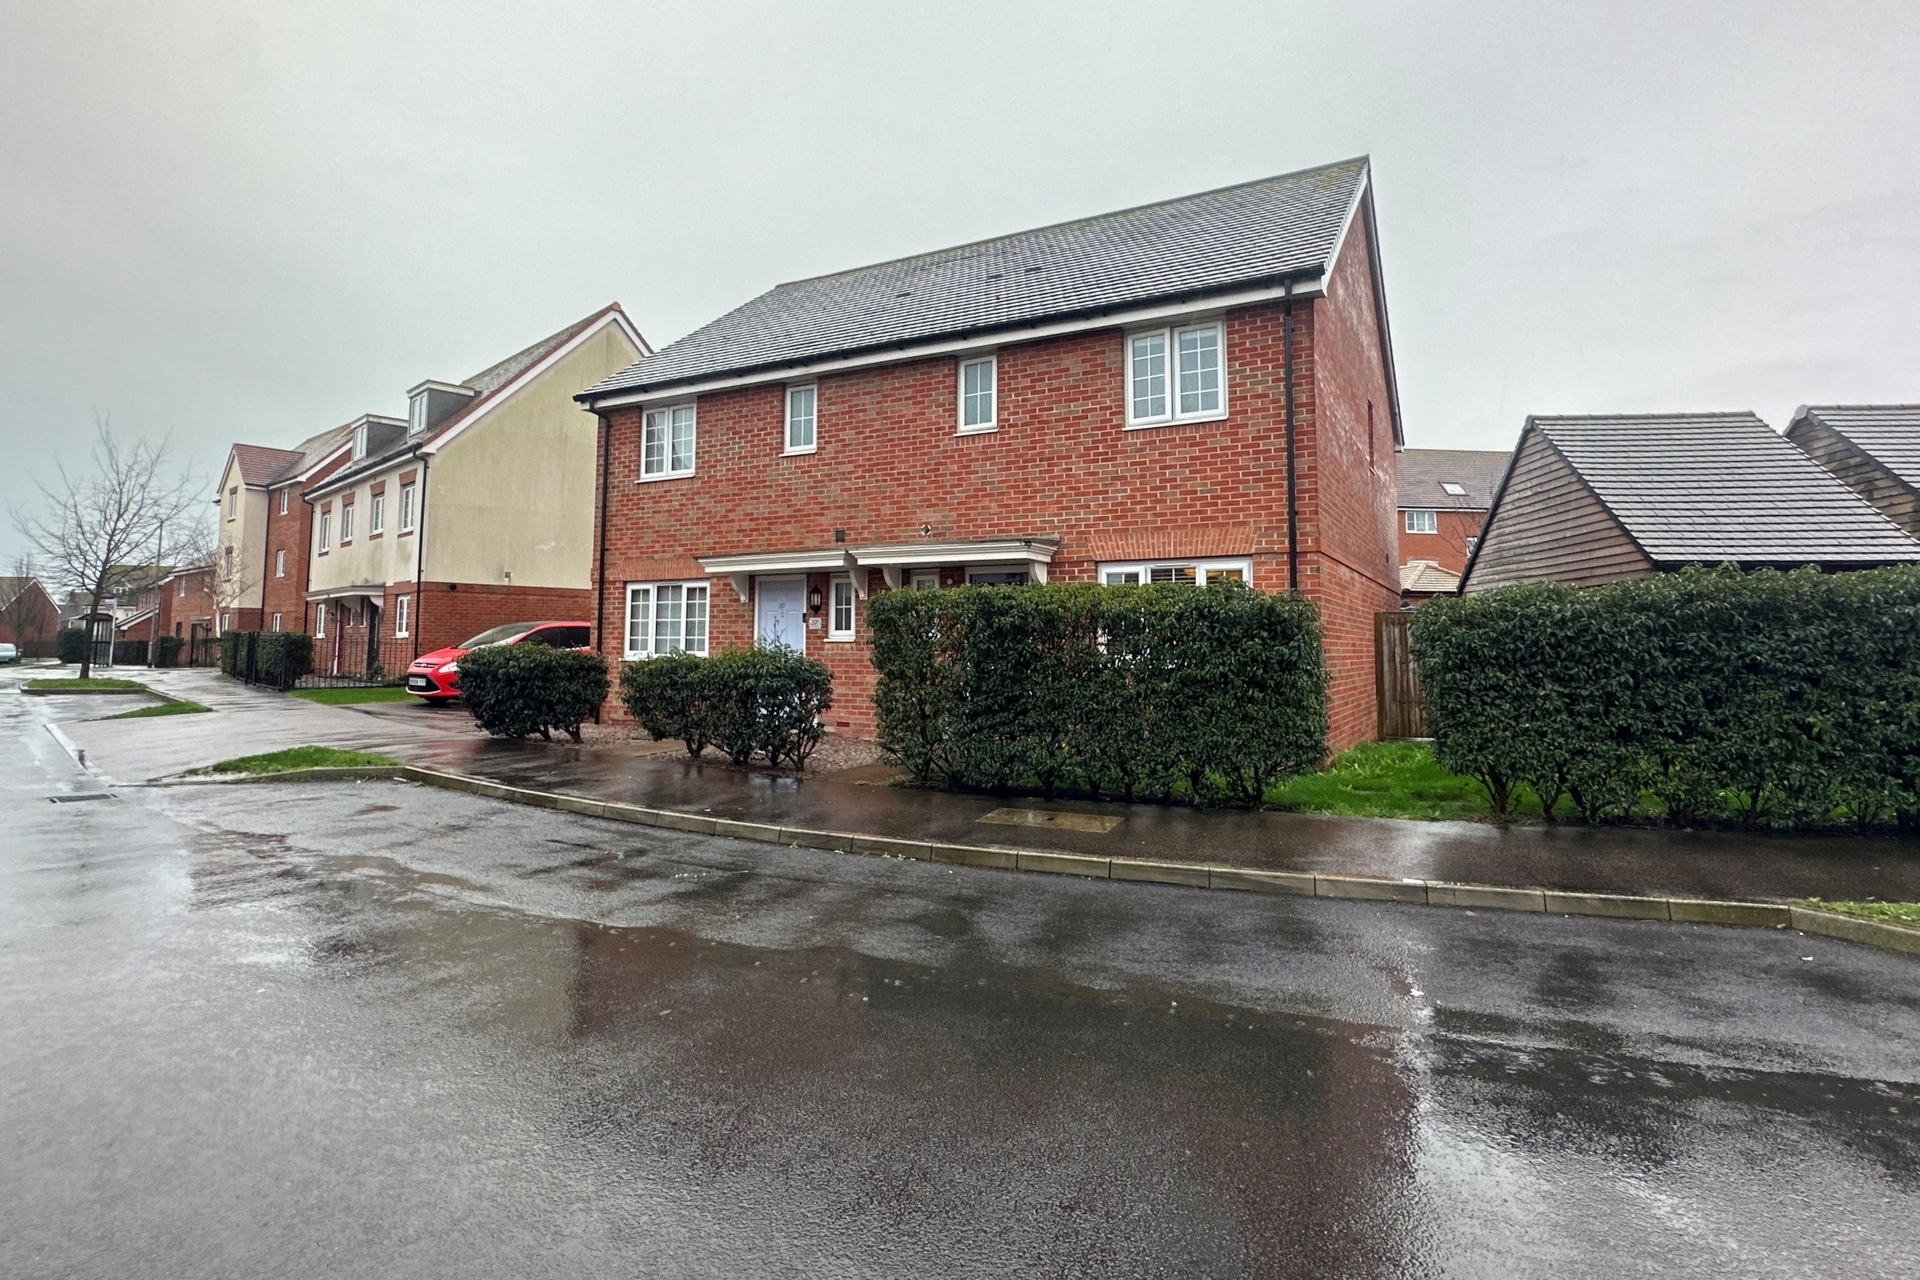 Hyton Drive  Deal  CT14